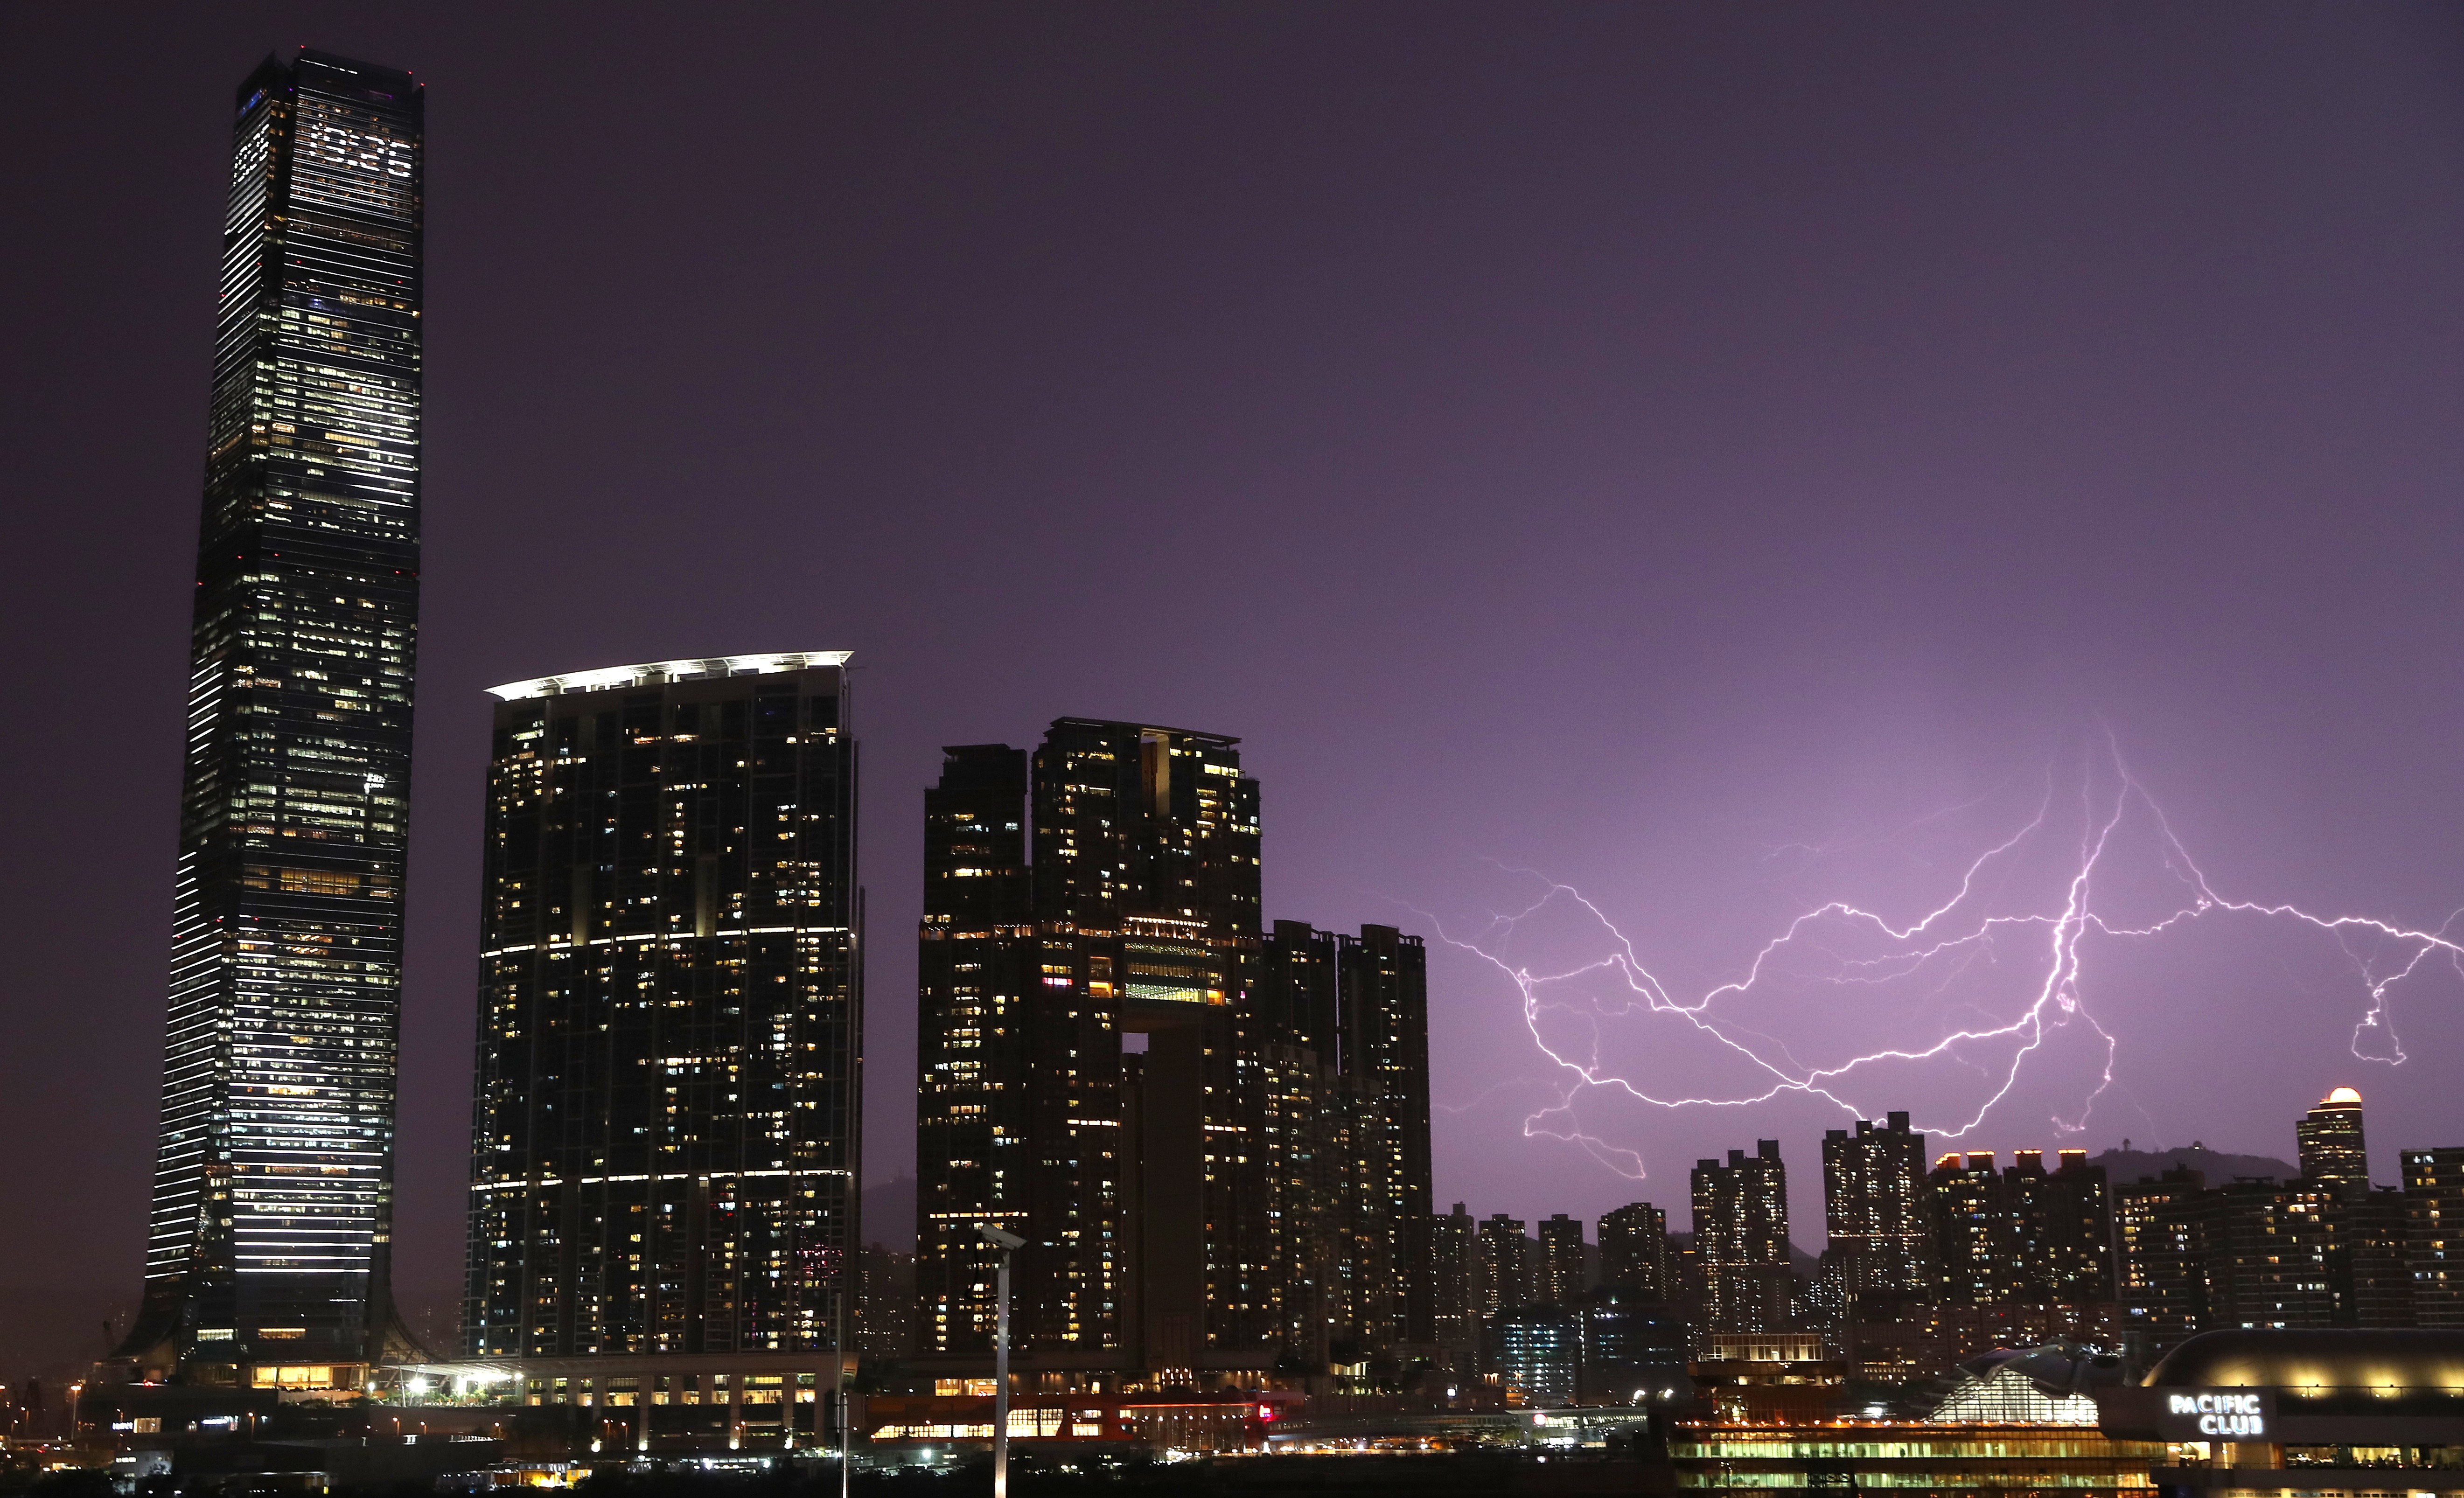 A record number of lightning strikes occurred on one day in April. Photo: K.Y. Cheng